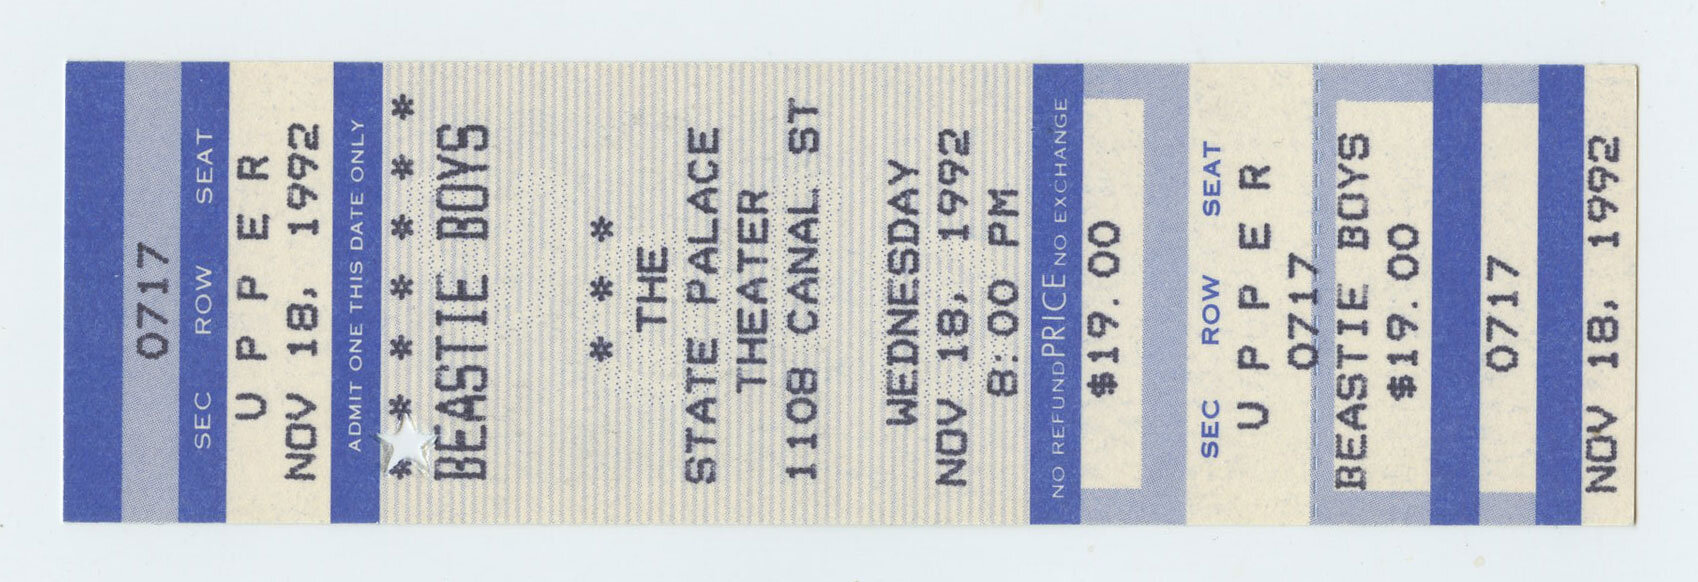 Beastie Boys Vintage Ticket 1992 Nov 18 The State Palace New Orleans